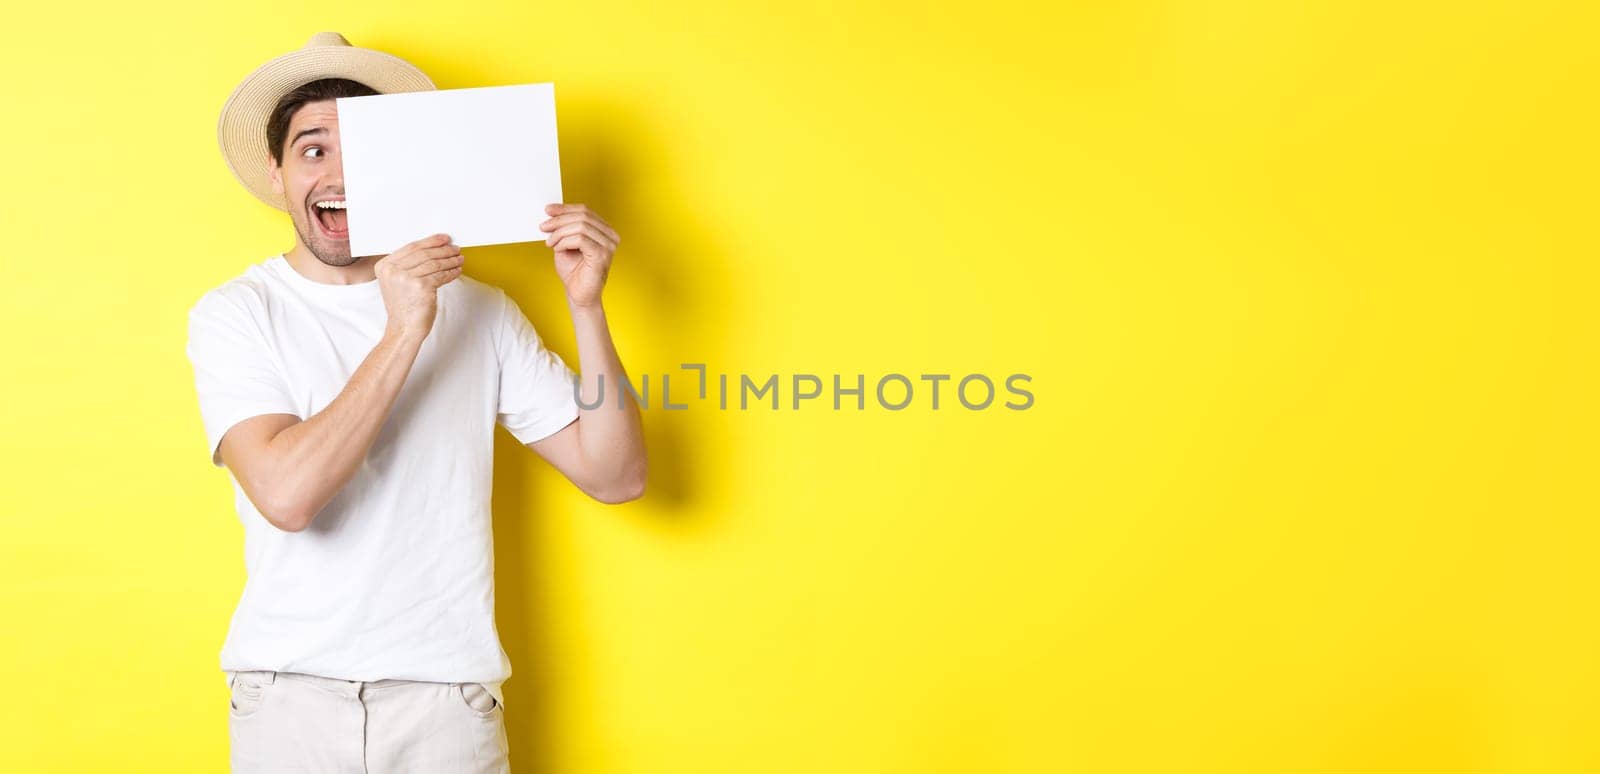 Excited man on vacation showing blank piece of paper for your logo, holding sign near face and smiling, standing against yellow background.